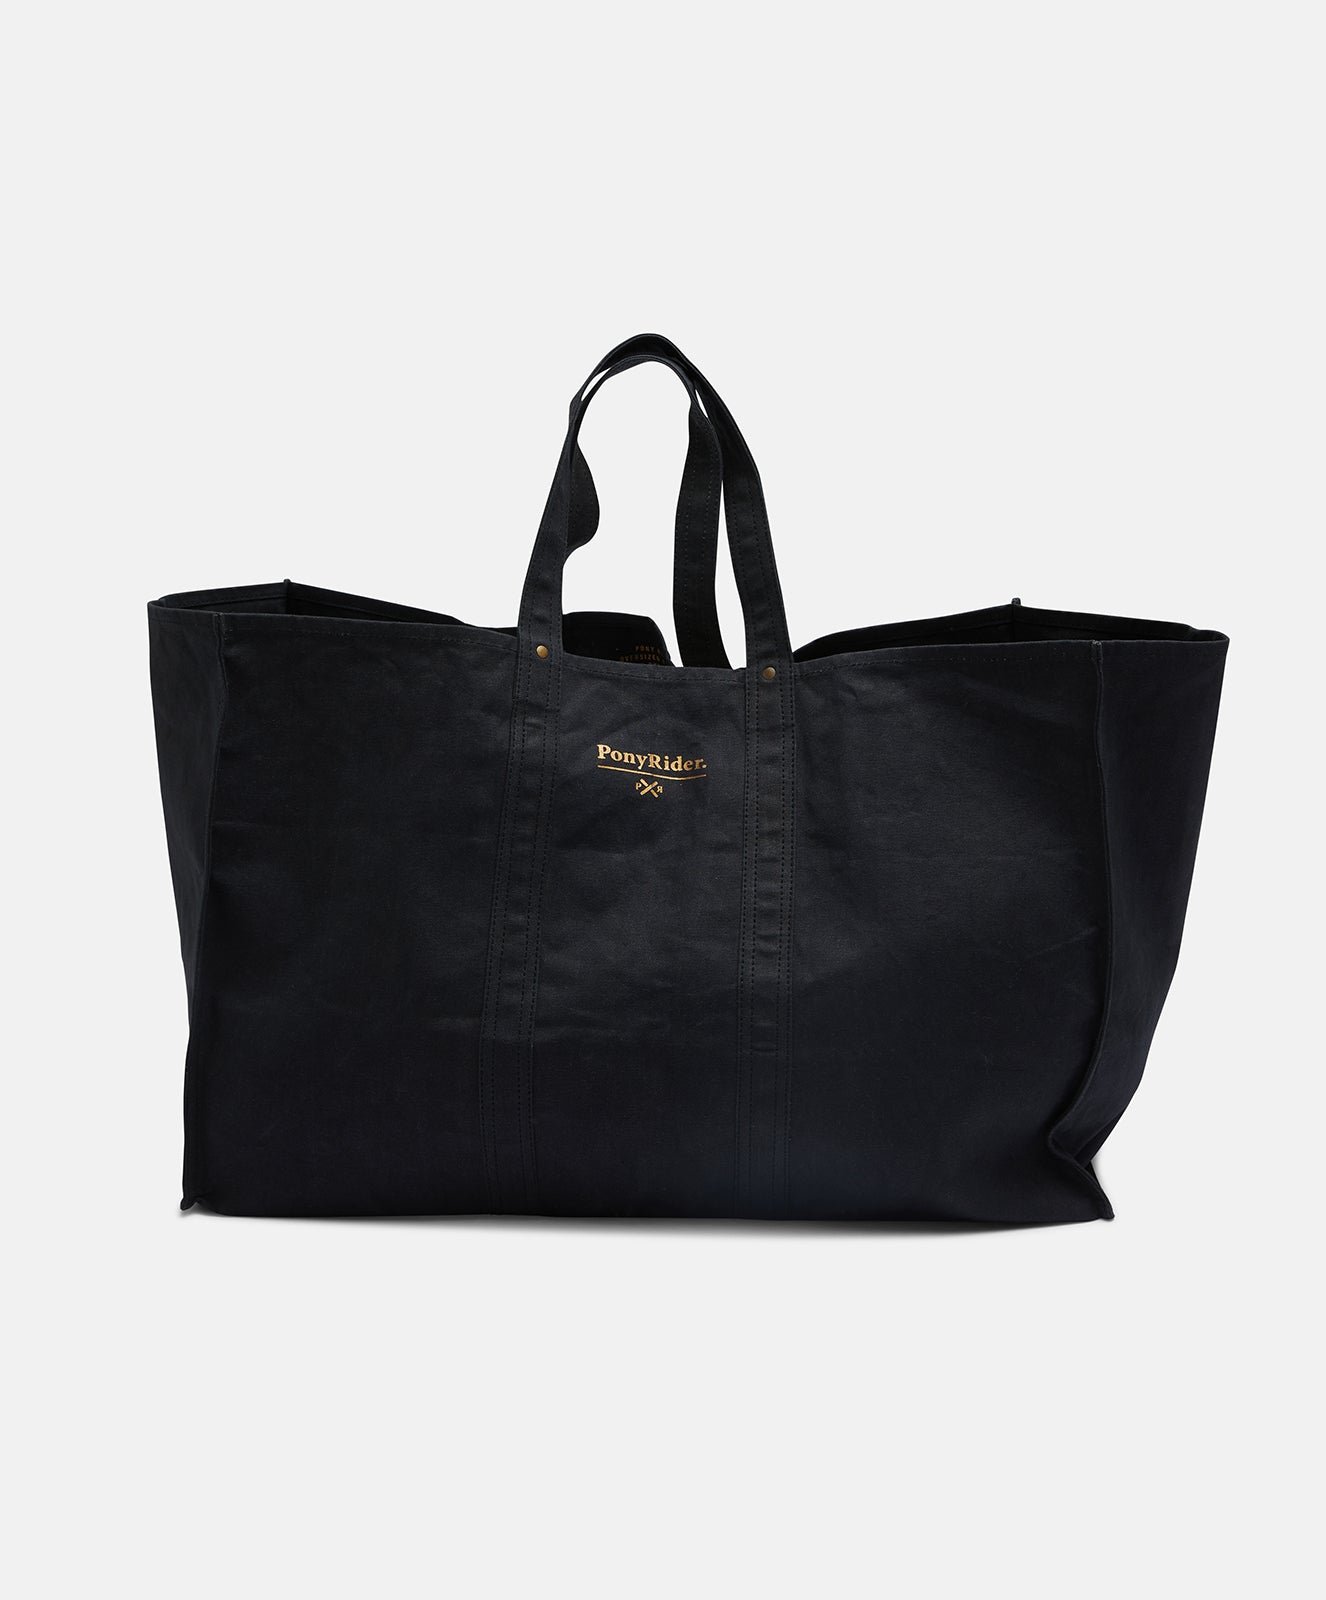 Market Carry All Canvas Tote Bag | Black